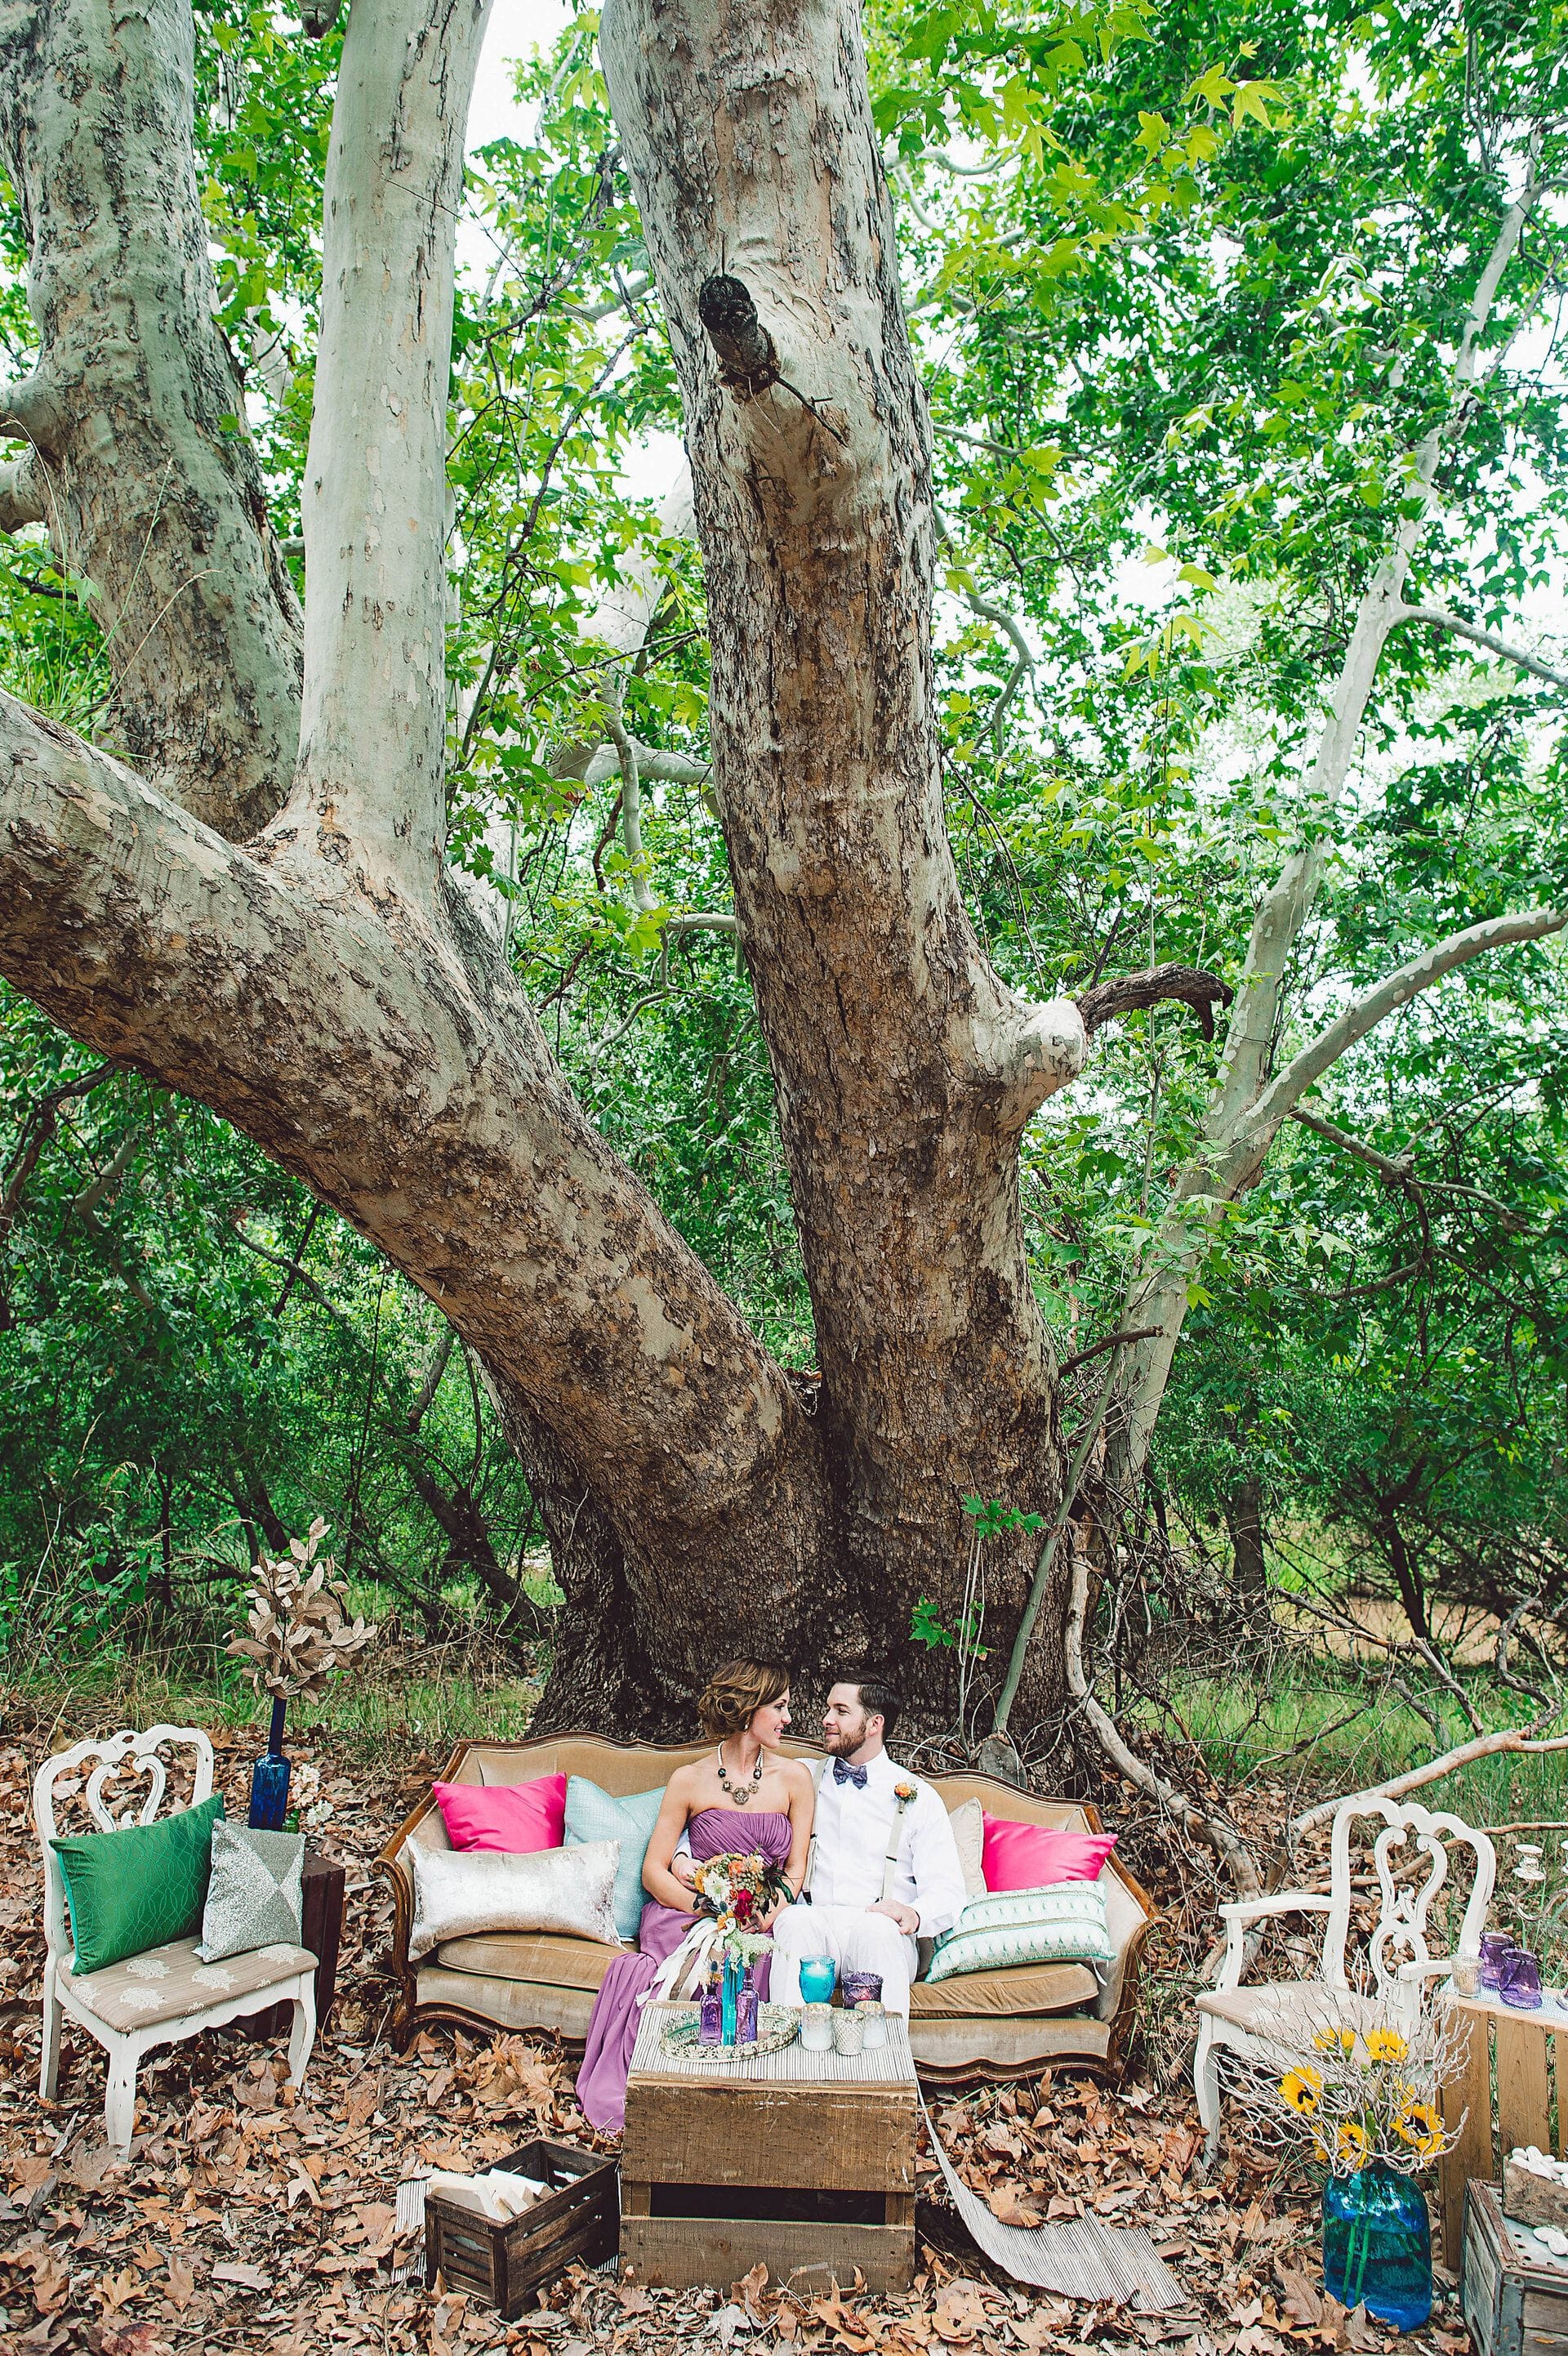 Bride and groom on a couch under a tree